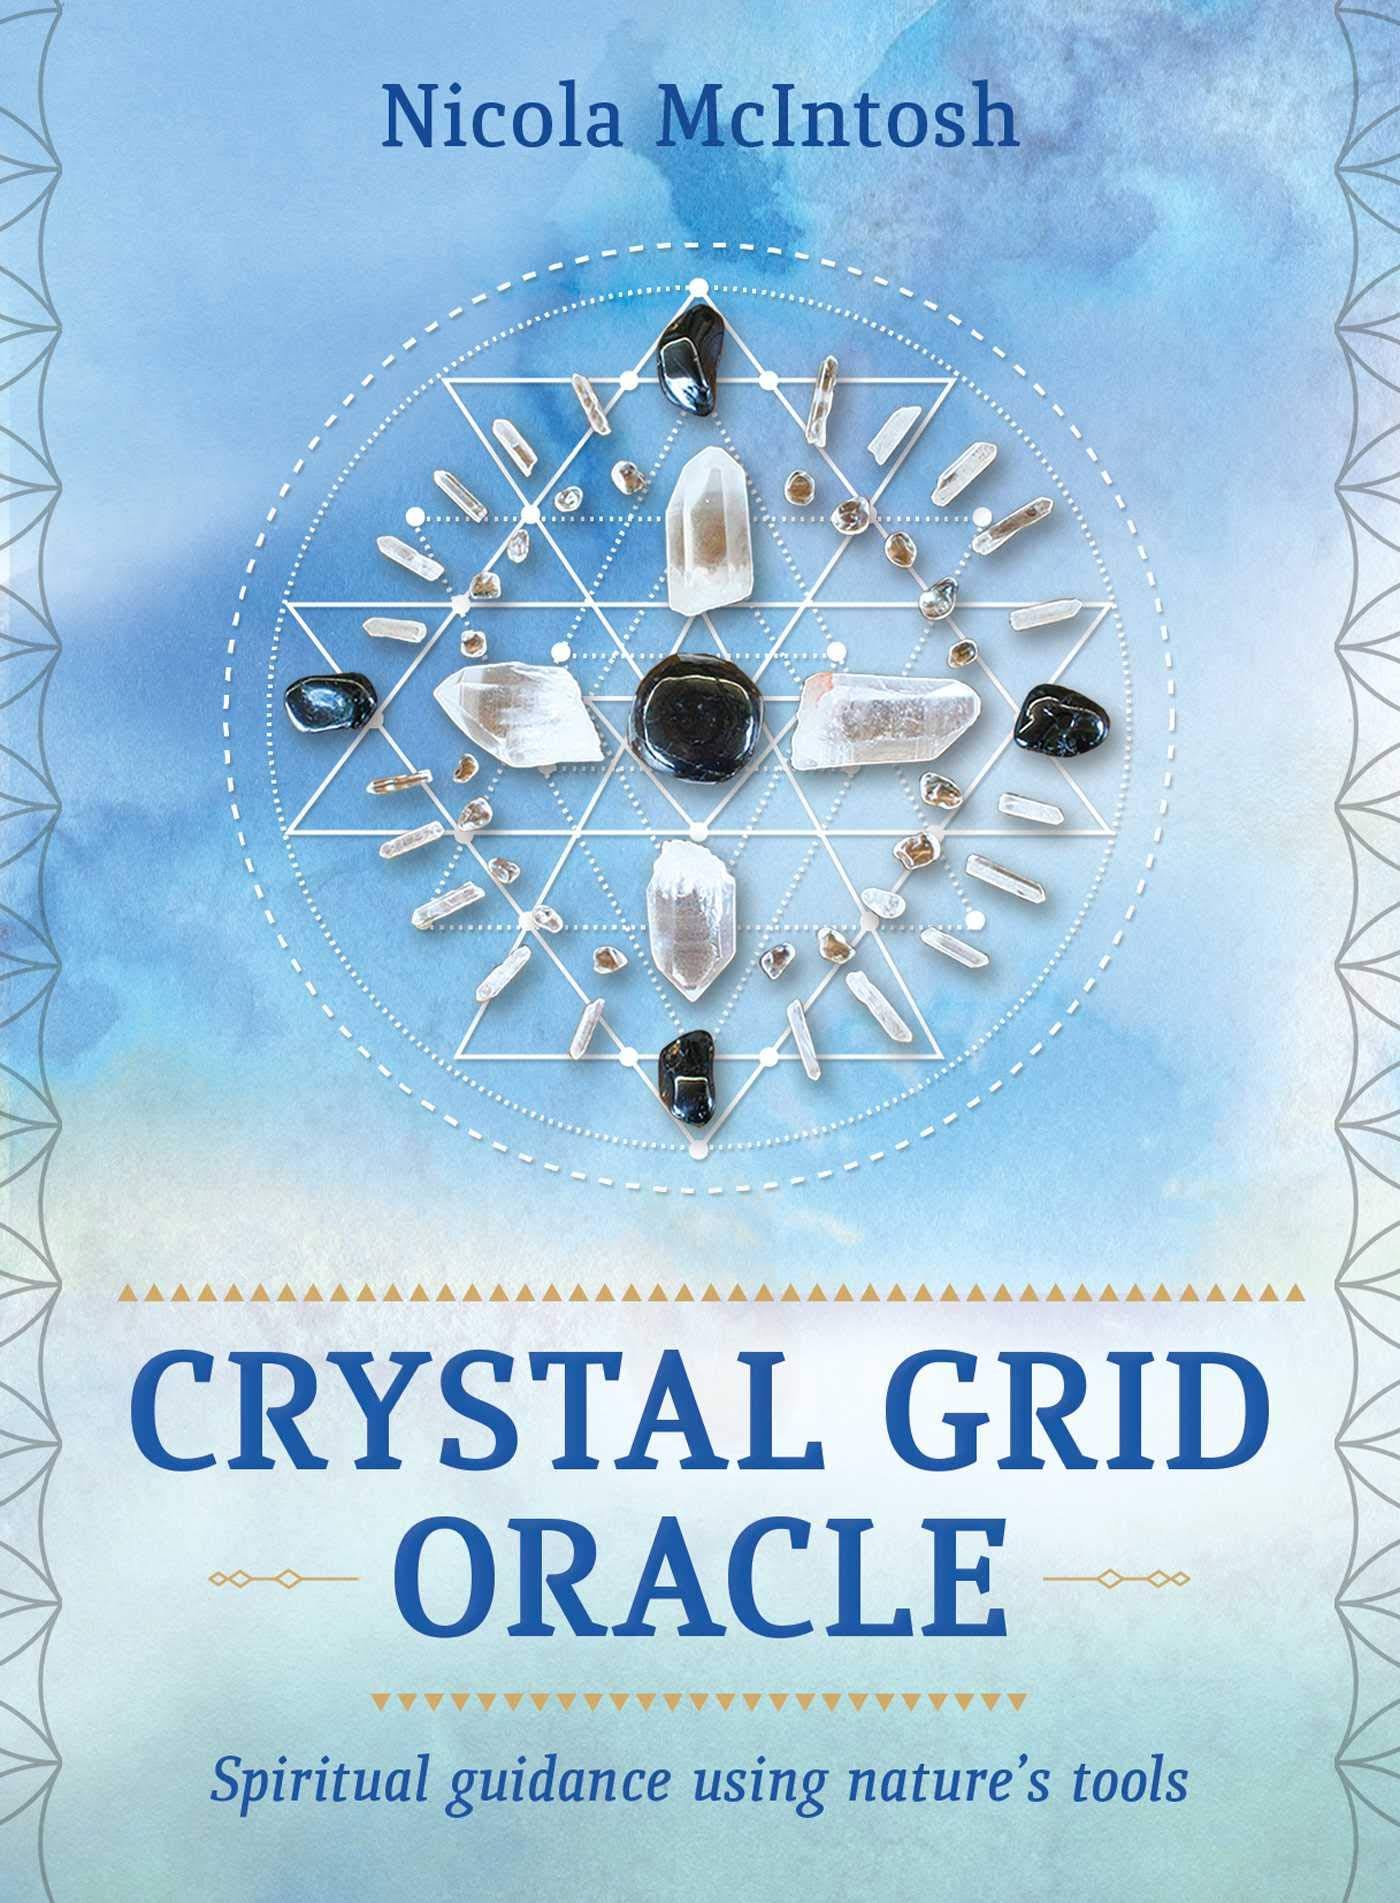 Crystal Grid Oracle: Spritual Guidance Using Nature's Tools [Book]